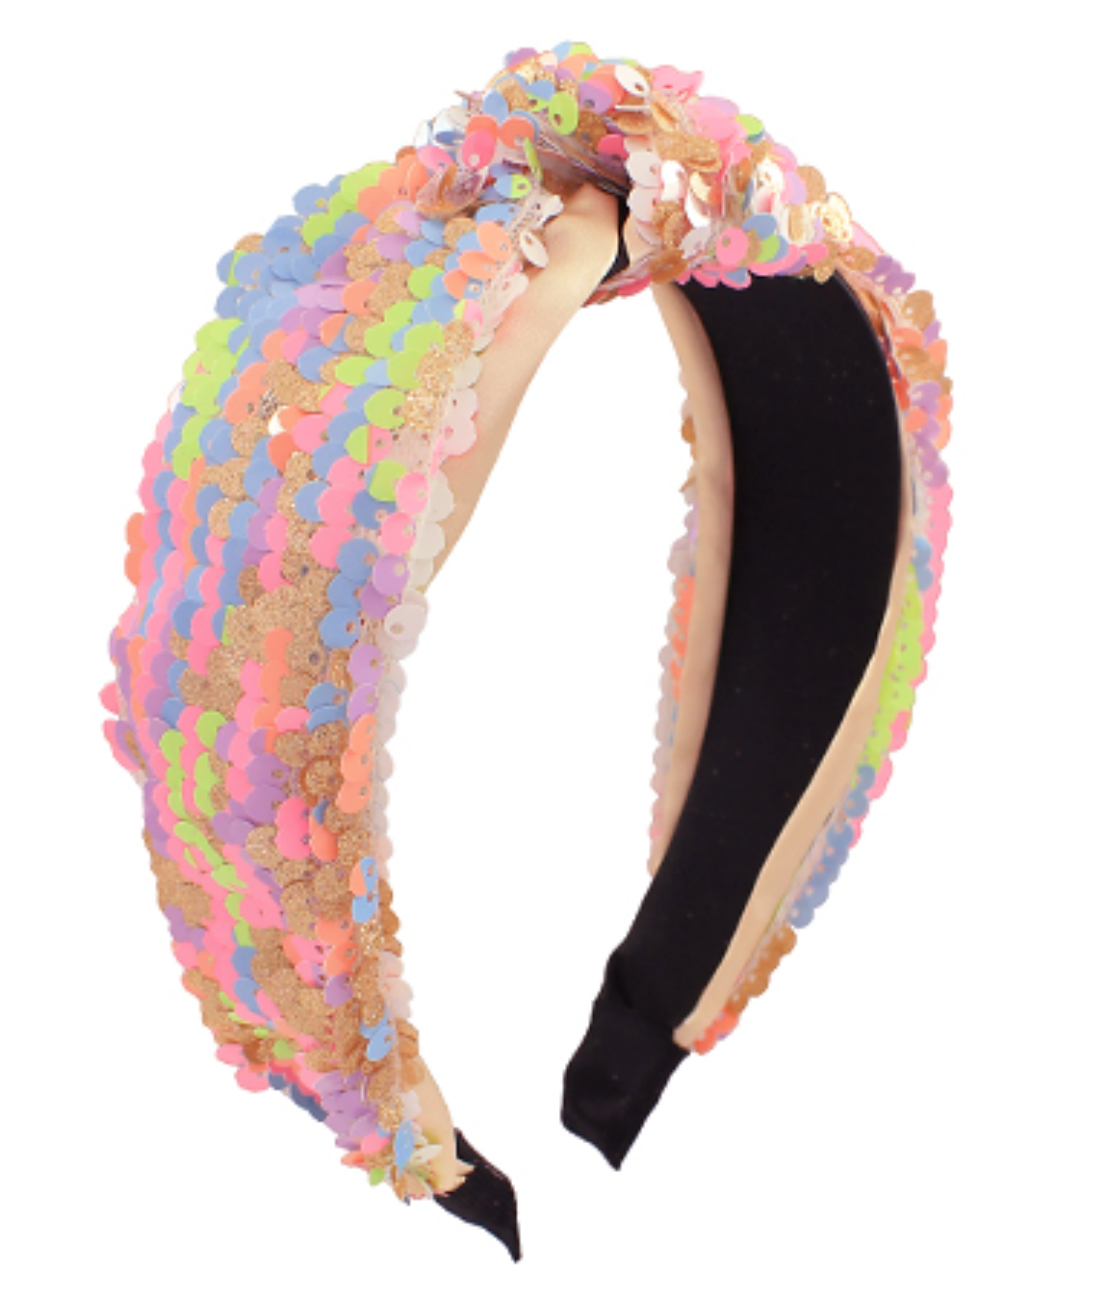 PARTY PARTY PARTY SEQUIN KNOTTED HEADBAND